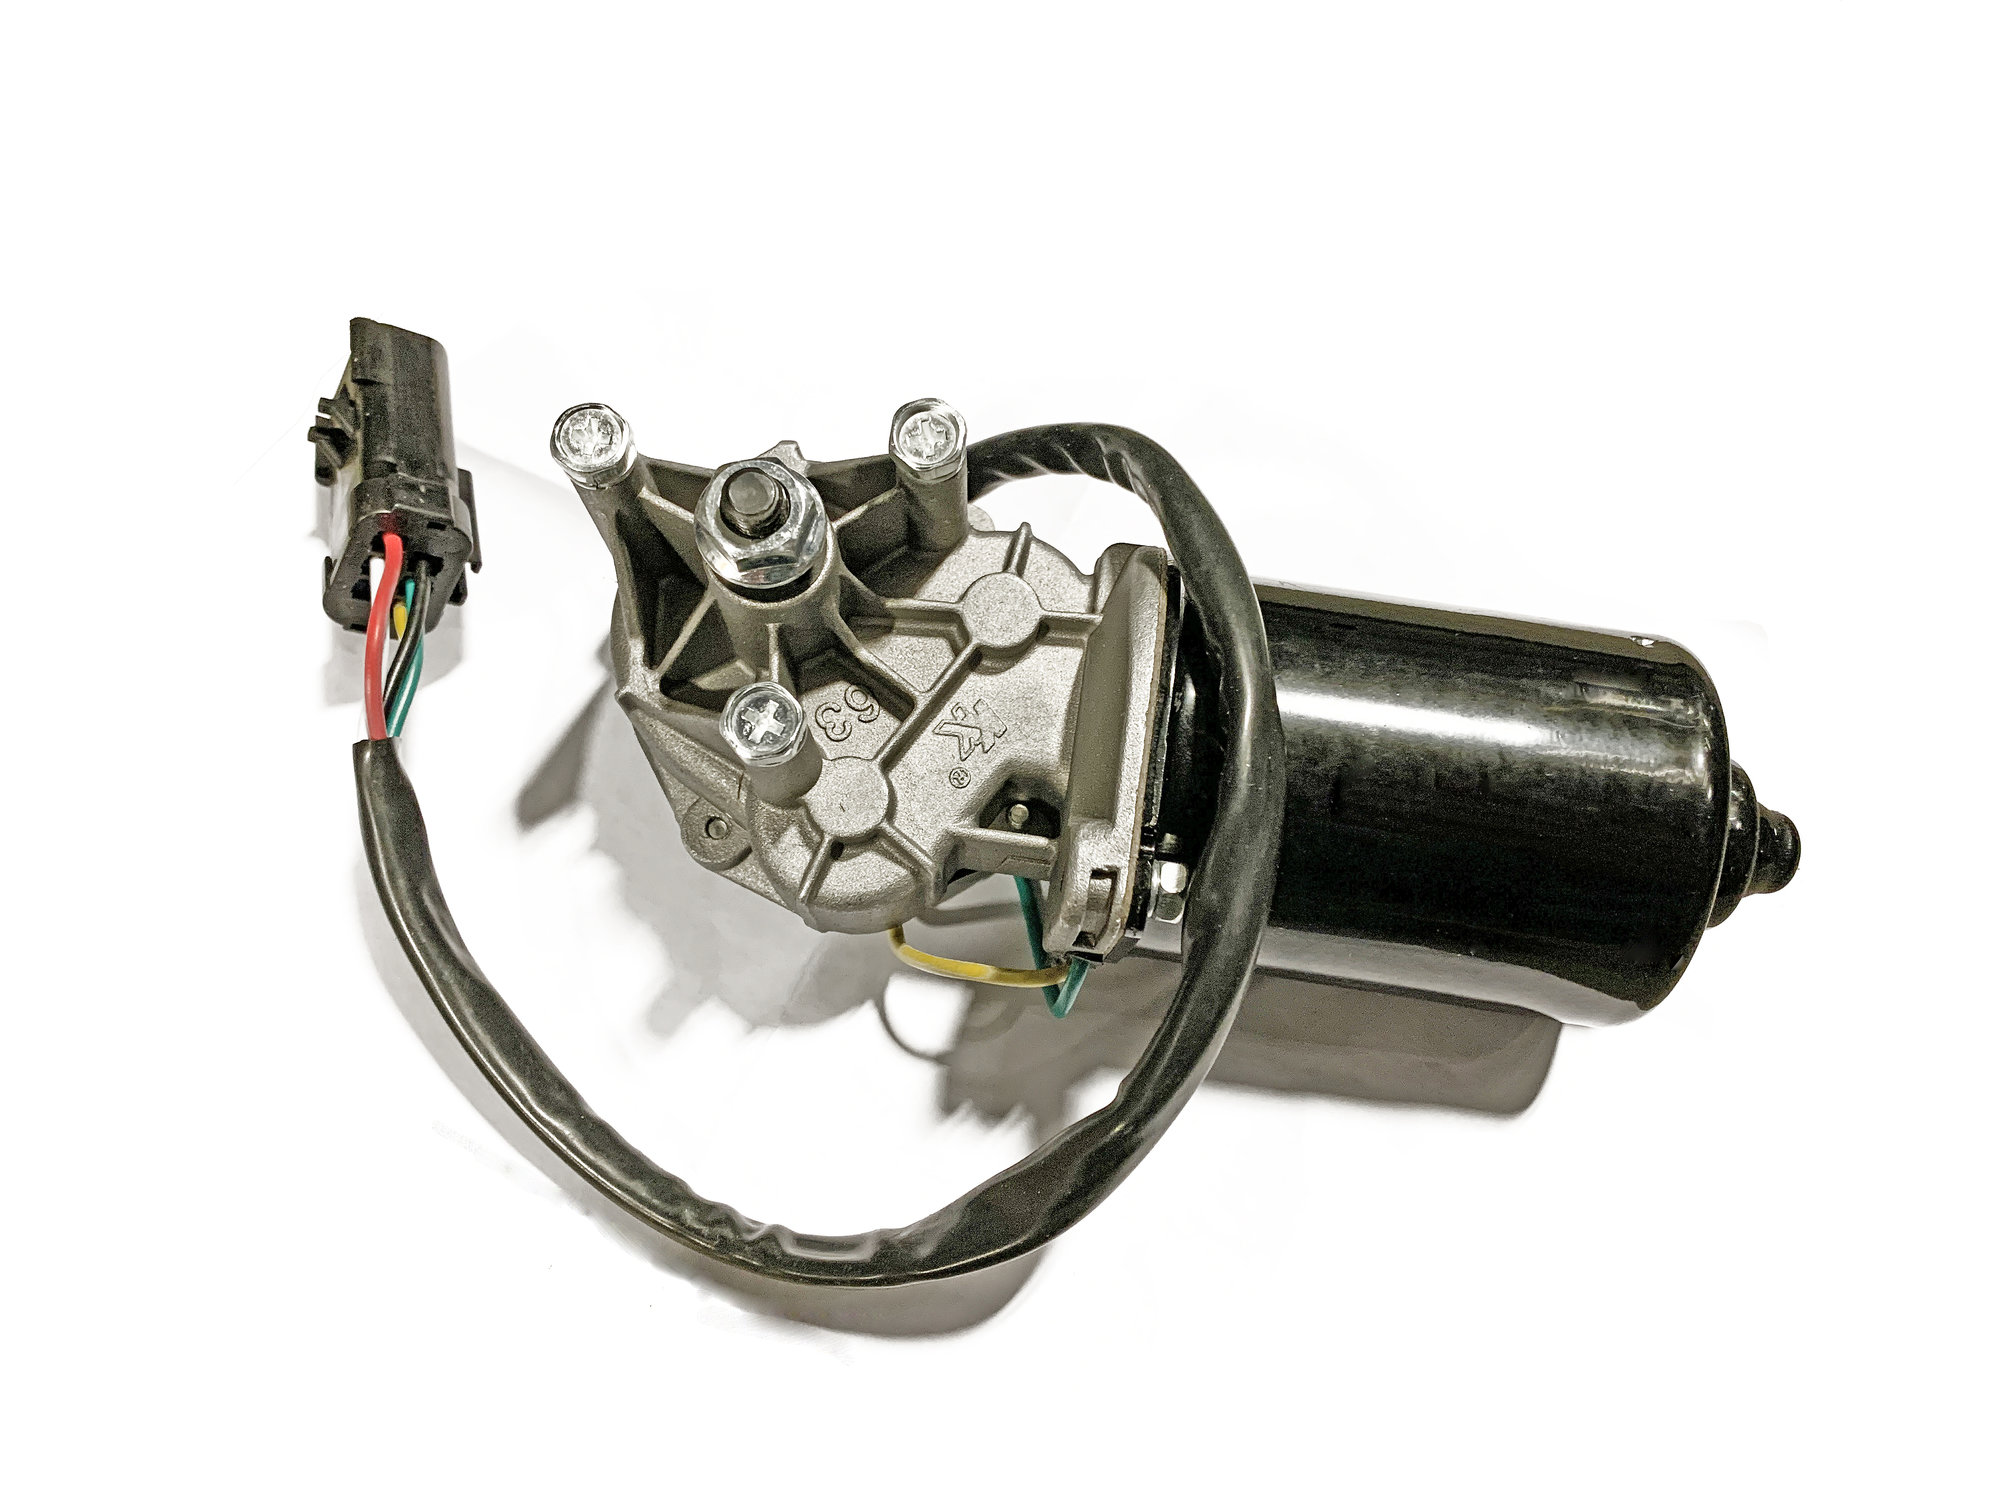 New Windshield Wiper Motor Front for Jeep Wrangler 1997-2002